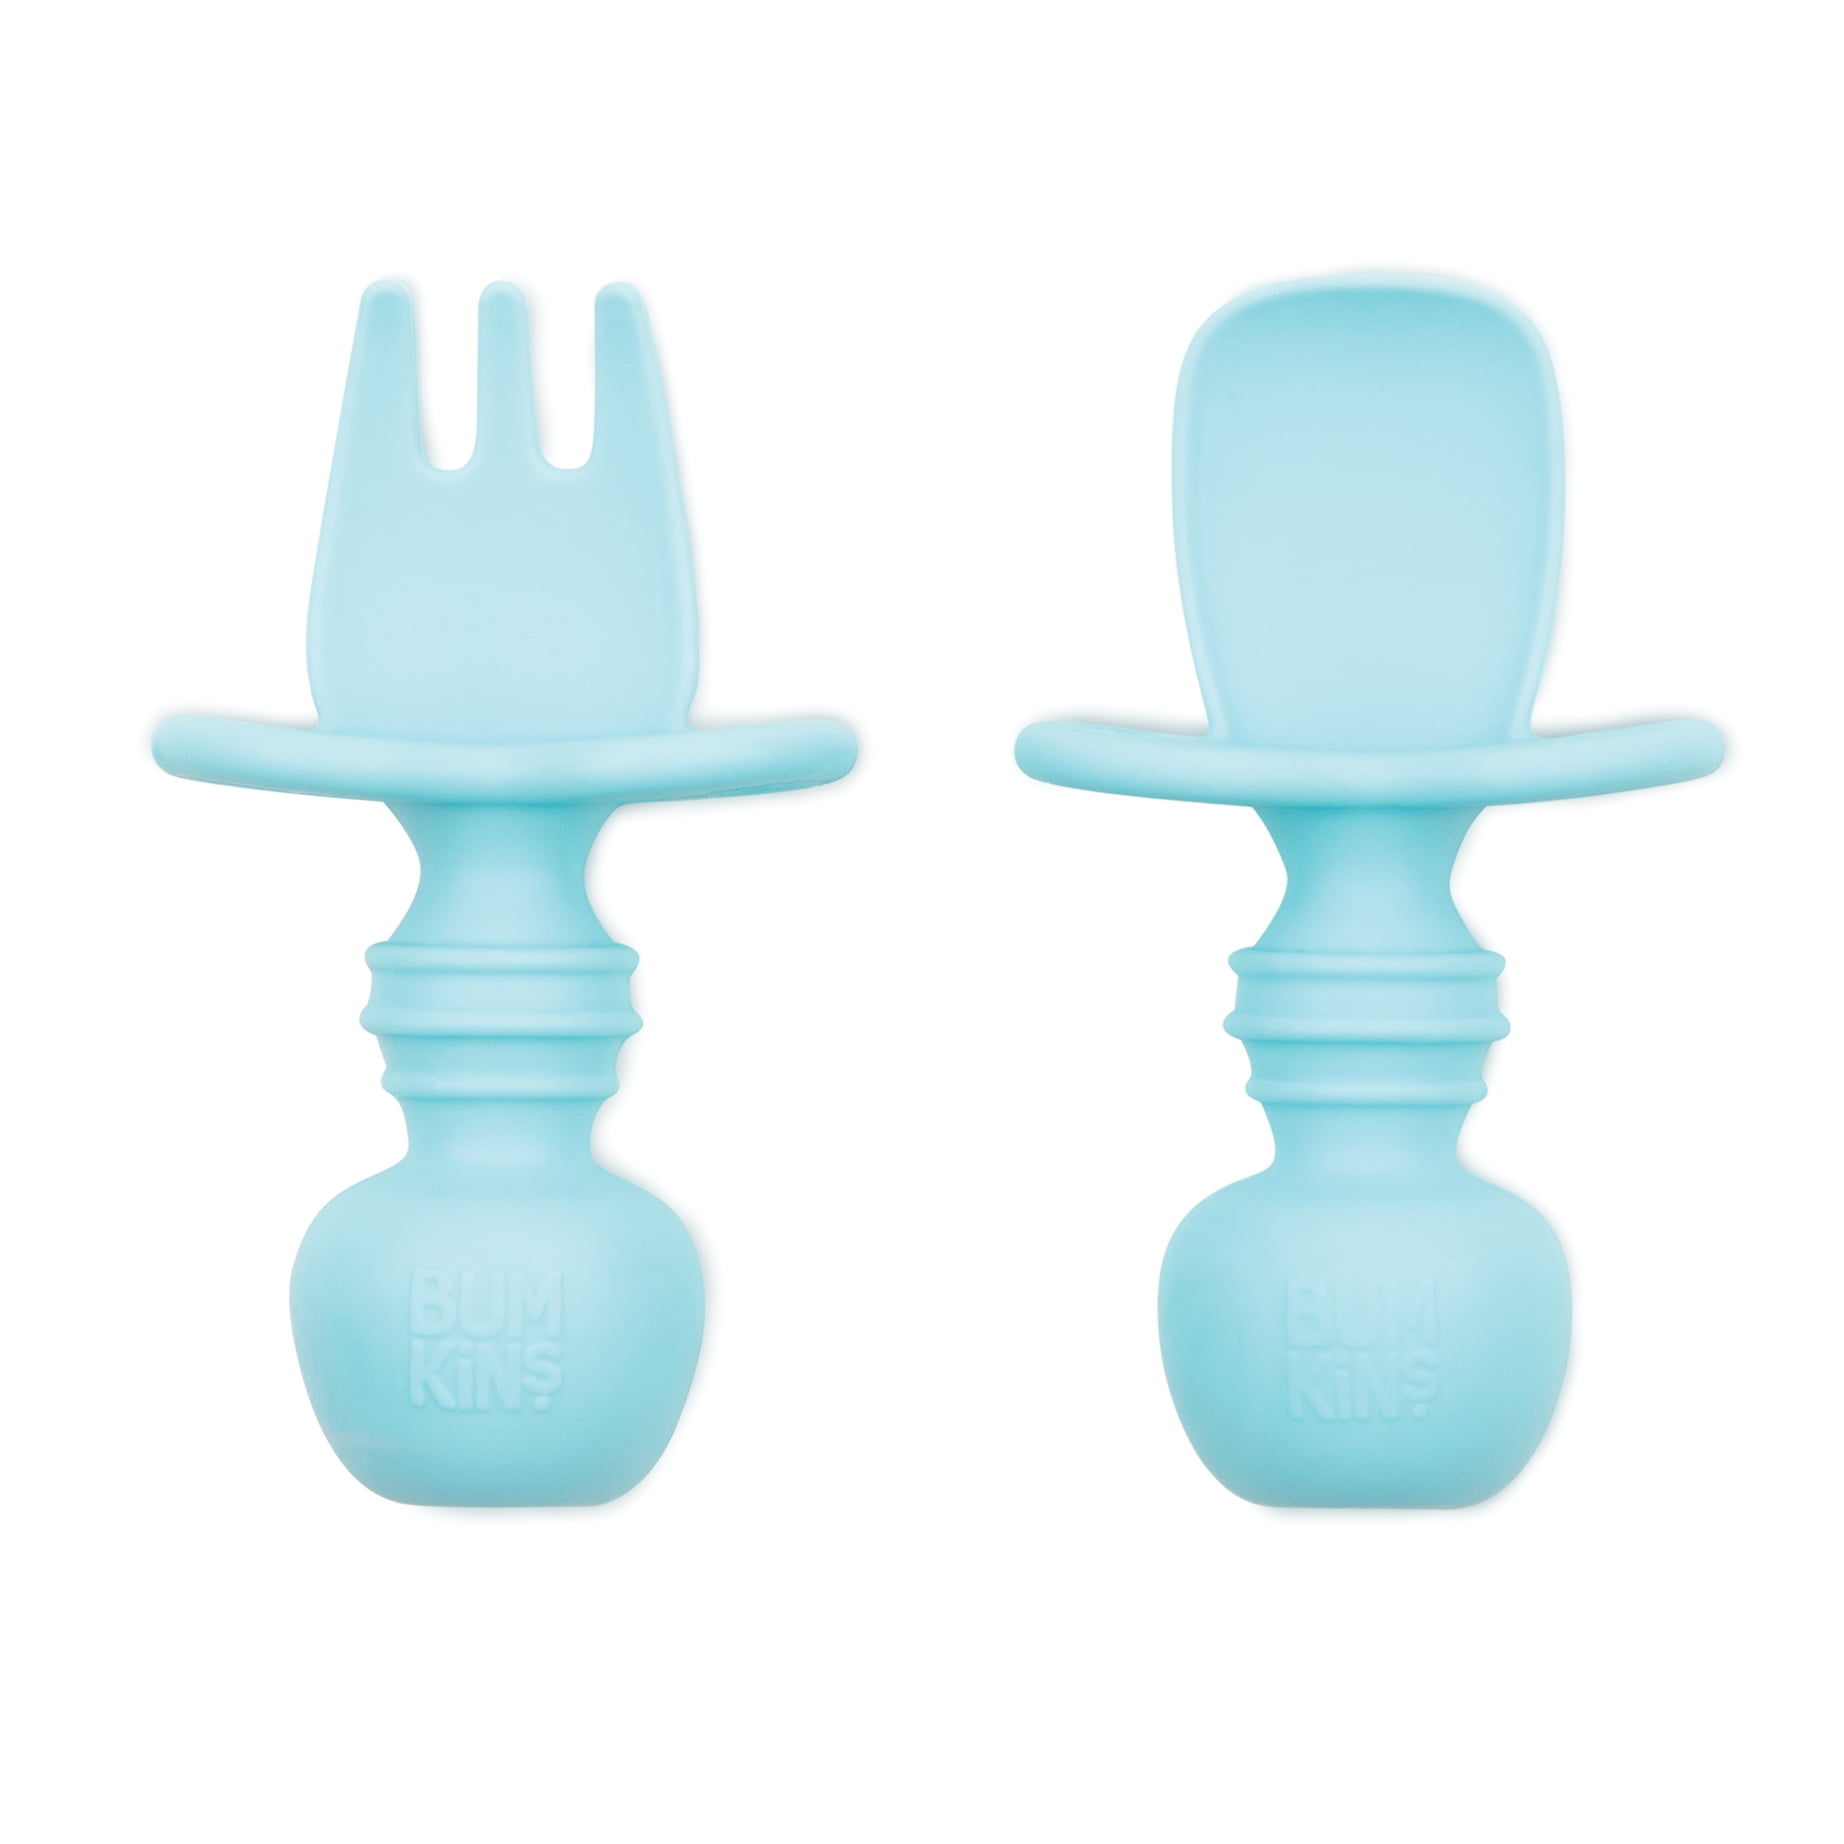 Baby Training Spoons & Forks, Silicone Chewtensils